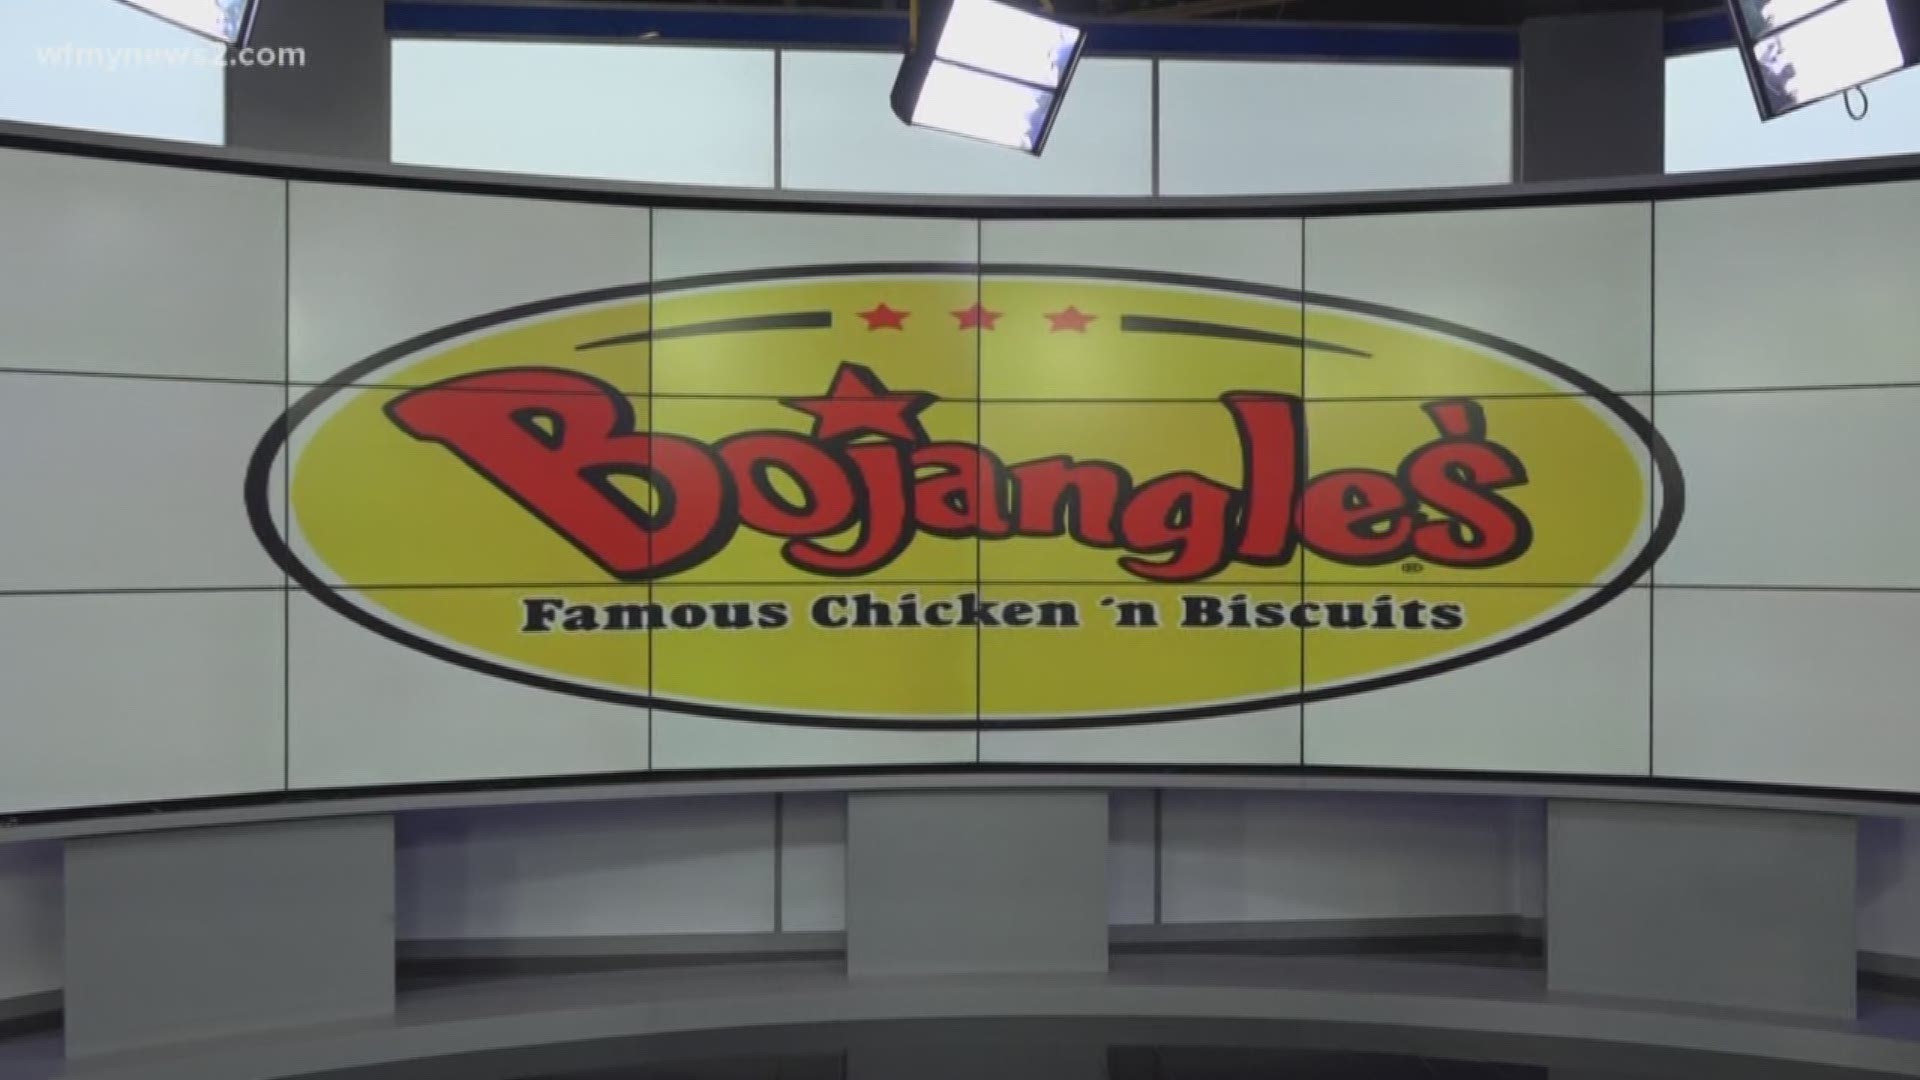 Bojangles' announced it was closing 10 underperforming restaurants and is getting rid of some menu items with sluggish sales at company-operated restaurants in a recent earnings report. 